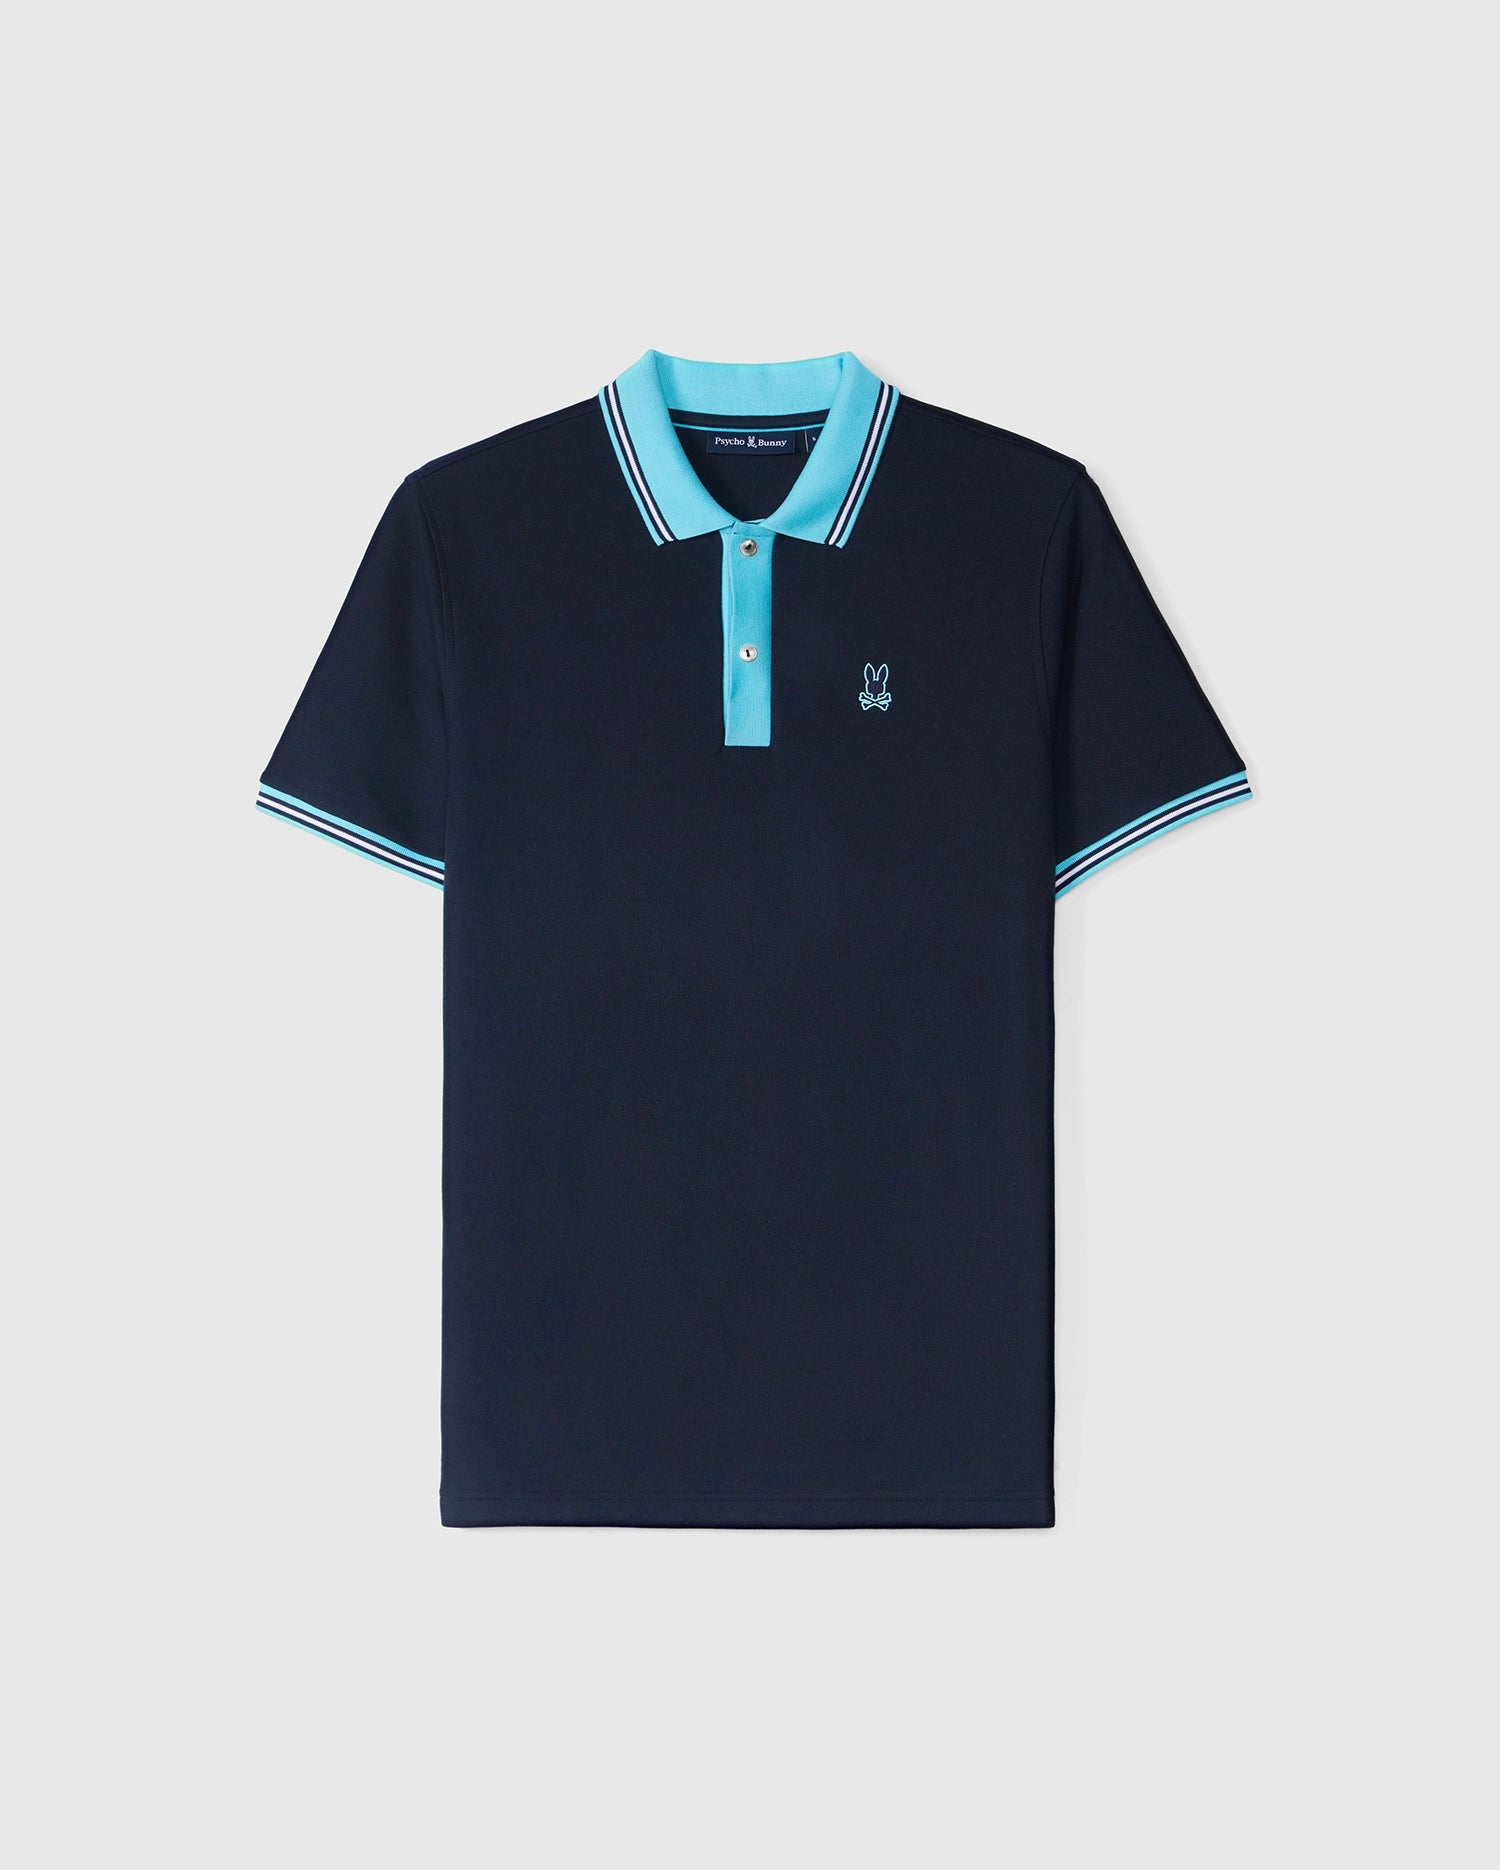 Navy blue Psycho Bunny Pima cotton polo shirt with contrast collar detail in white and light blue stripes on the collar and sleeves, featuring a small white logo on the left chest. The shirt is displayed on a